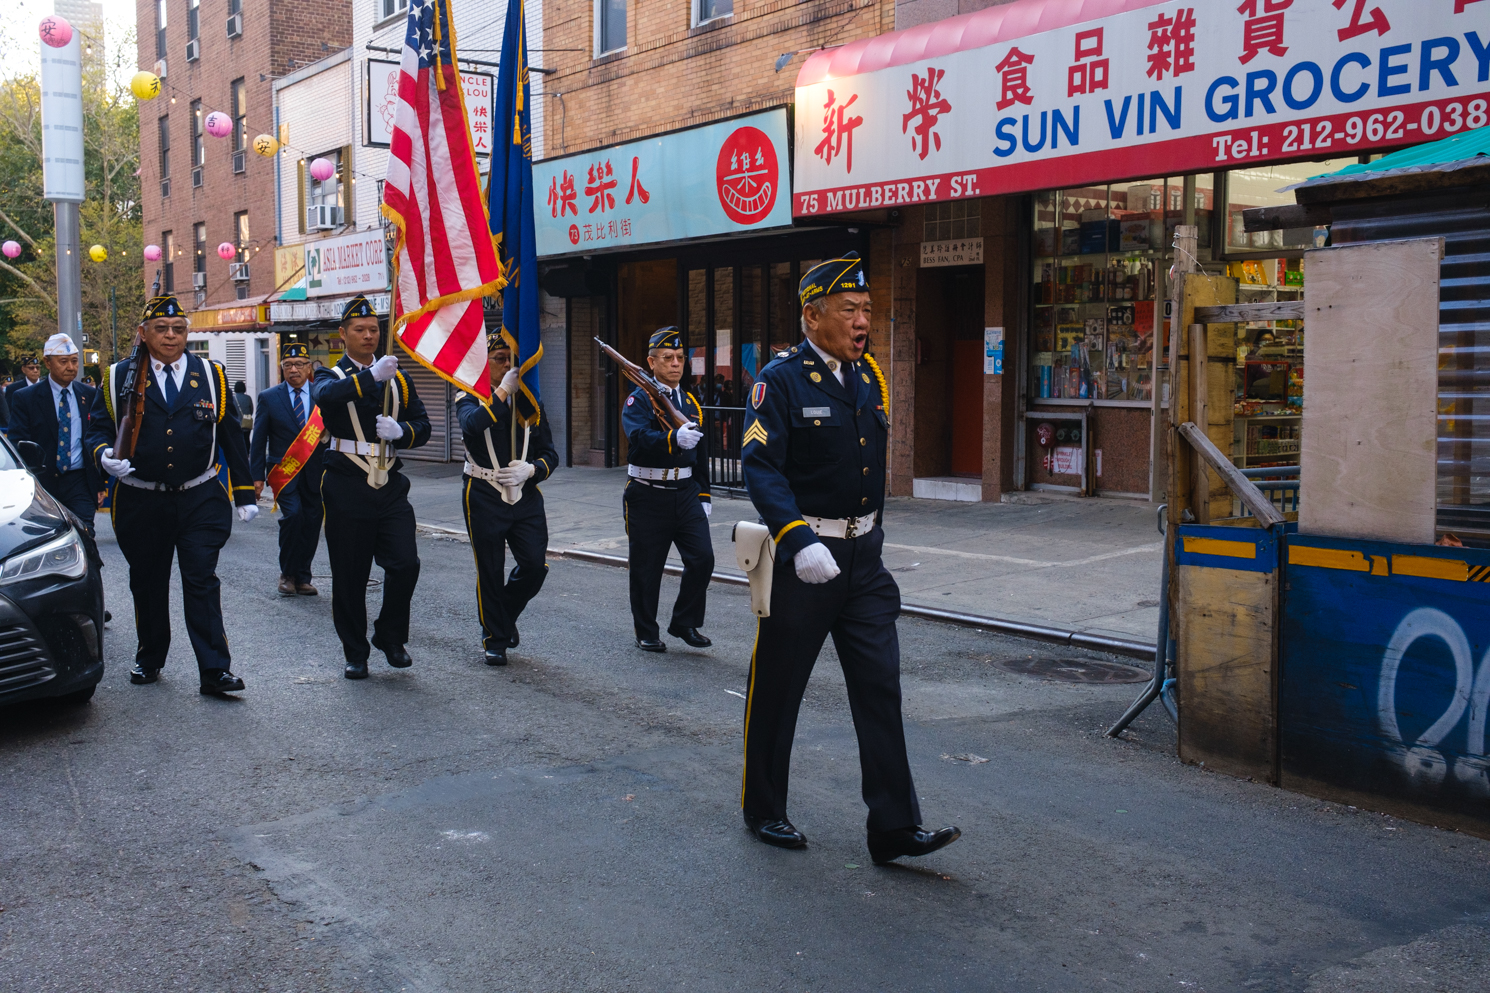 A group of Chinese Veterans dressed in military uniforms marches through Mulberry Street.